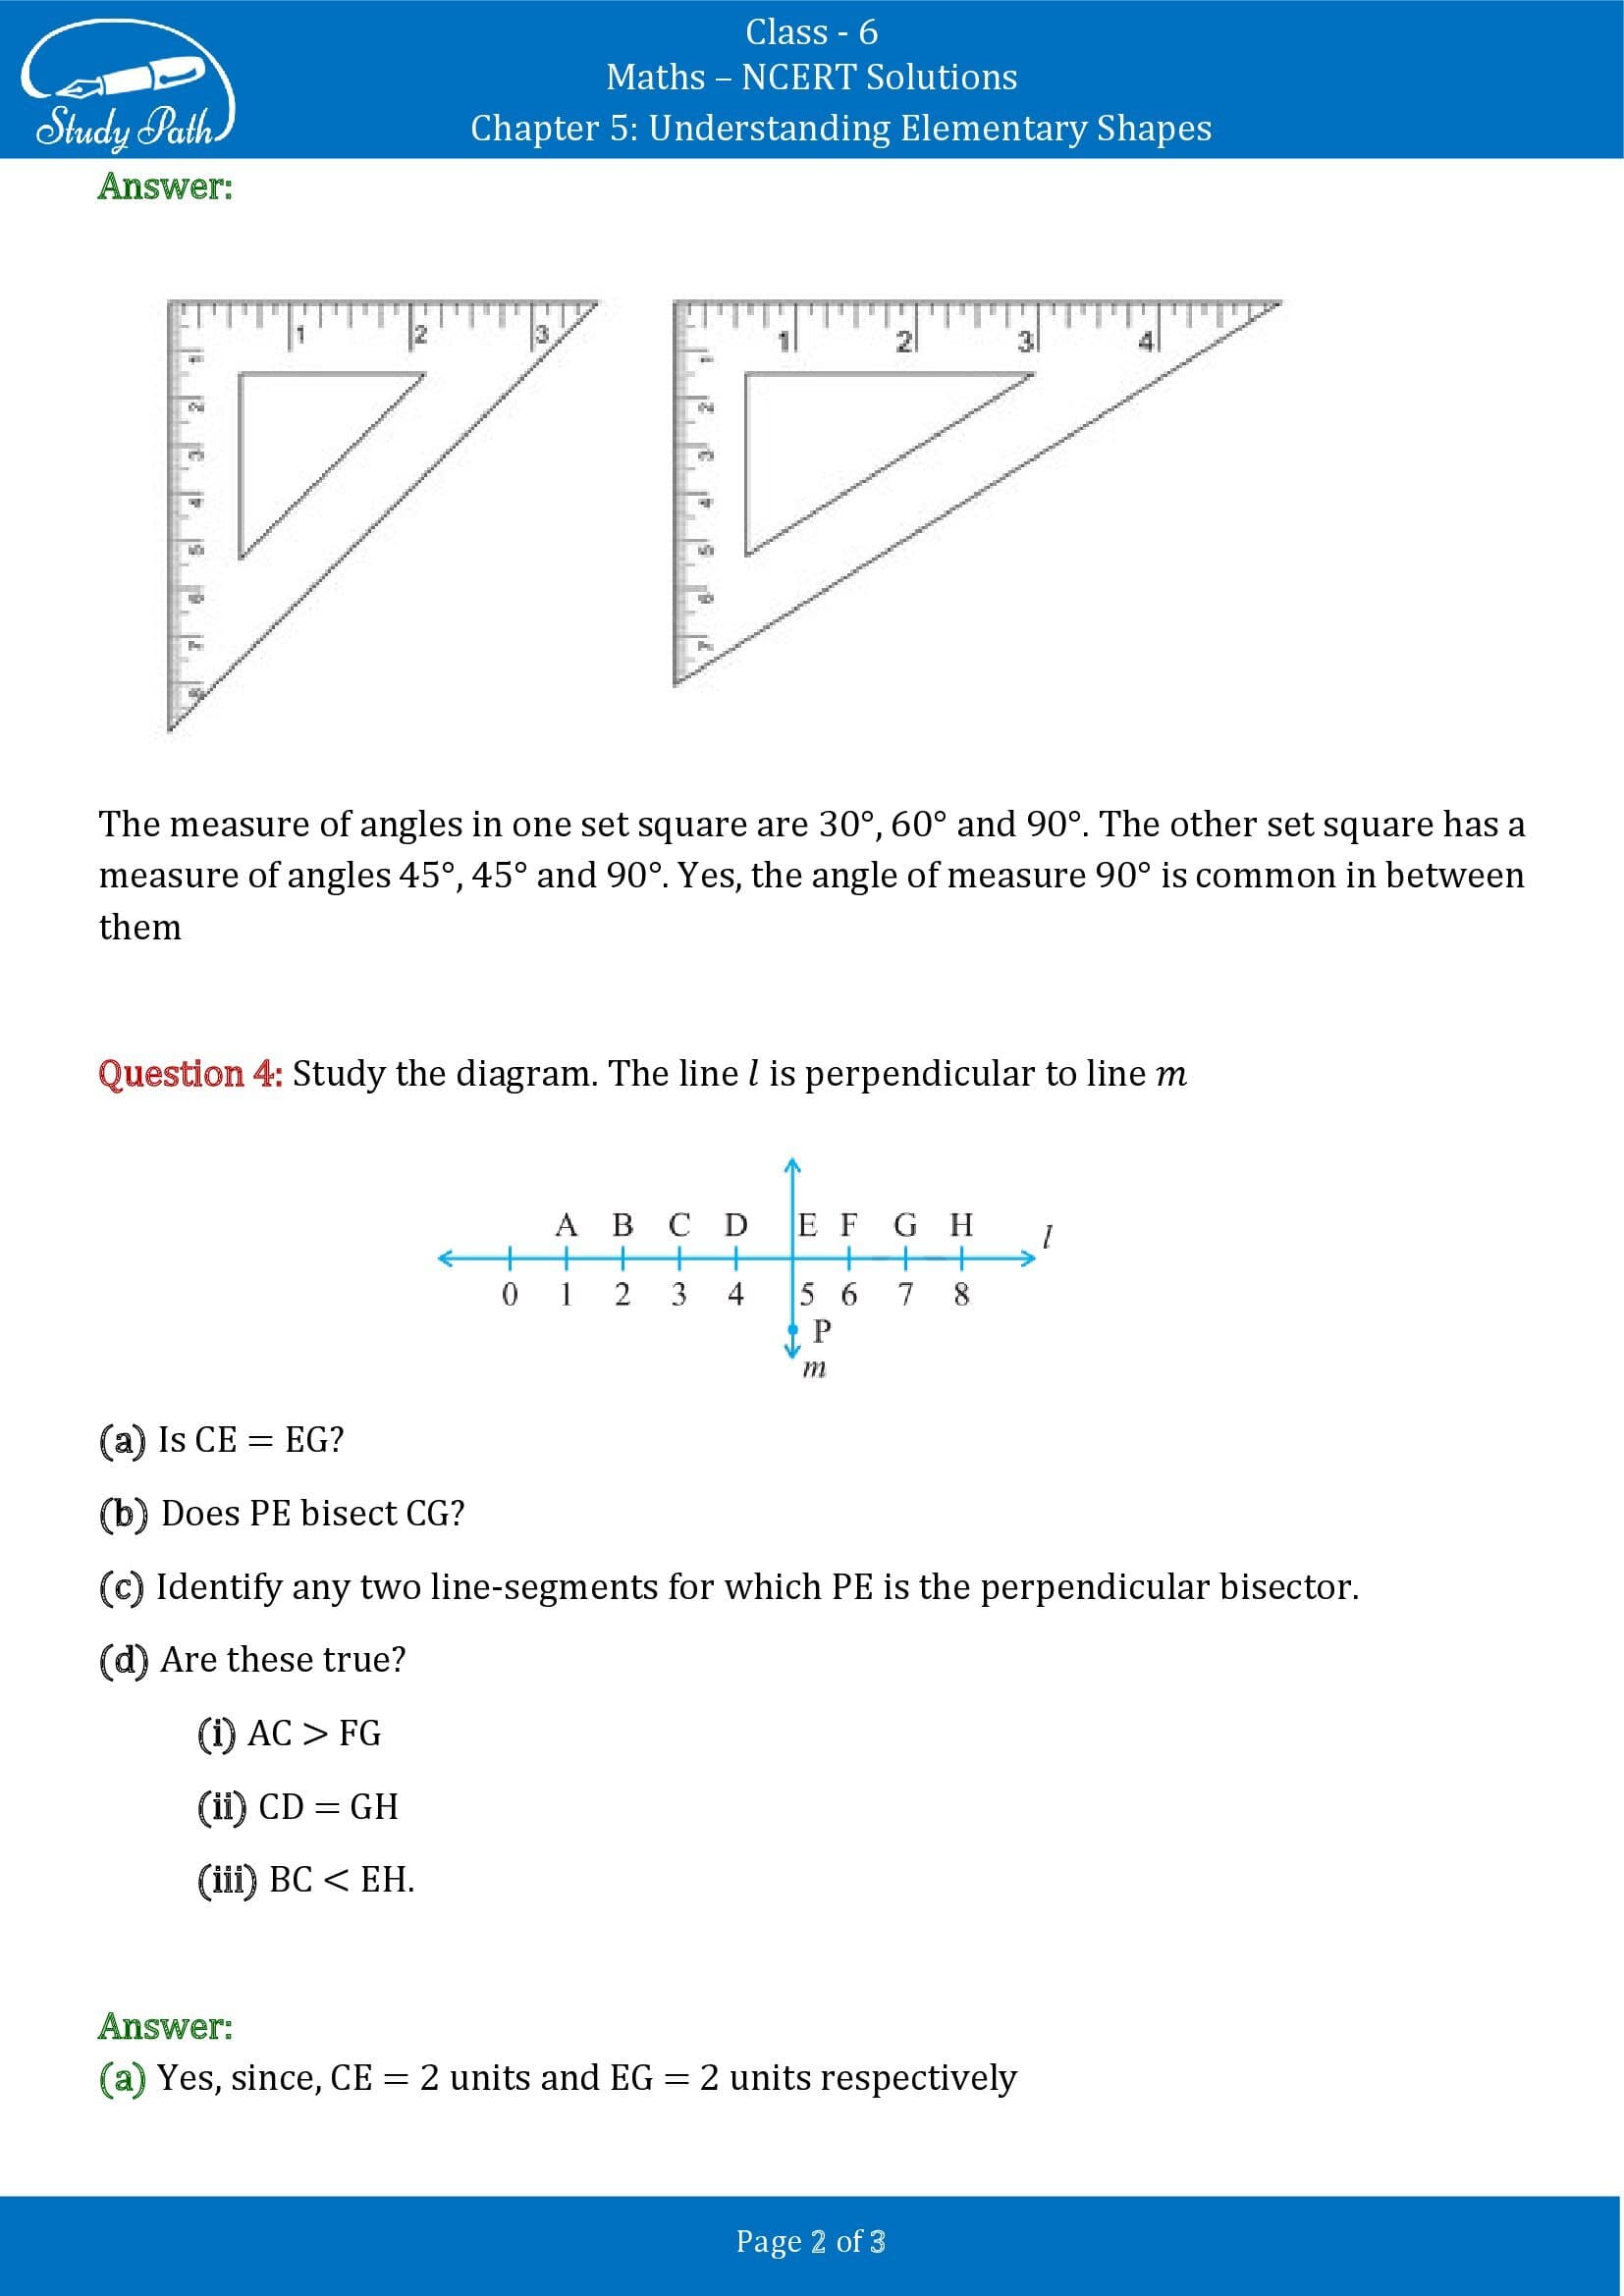 NCERT Solutions for Class 6 Maths Chapter 5 Understanding Elementary Shapes Exercise 5.5 00002